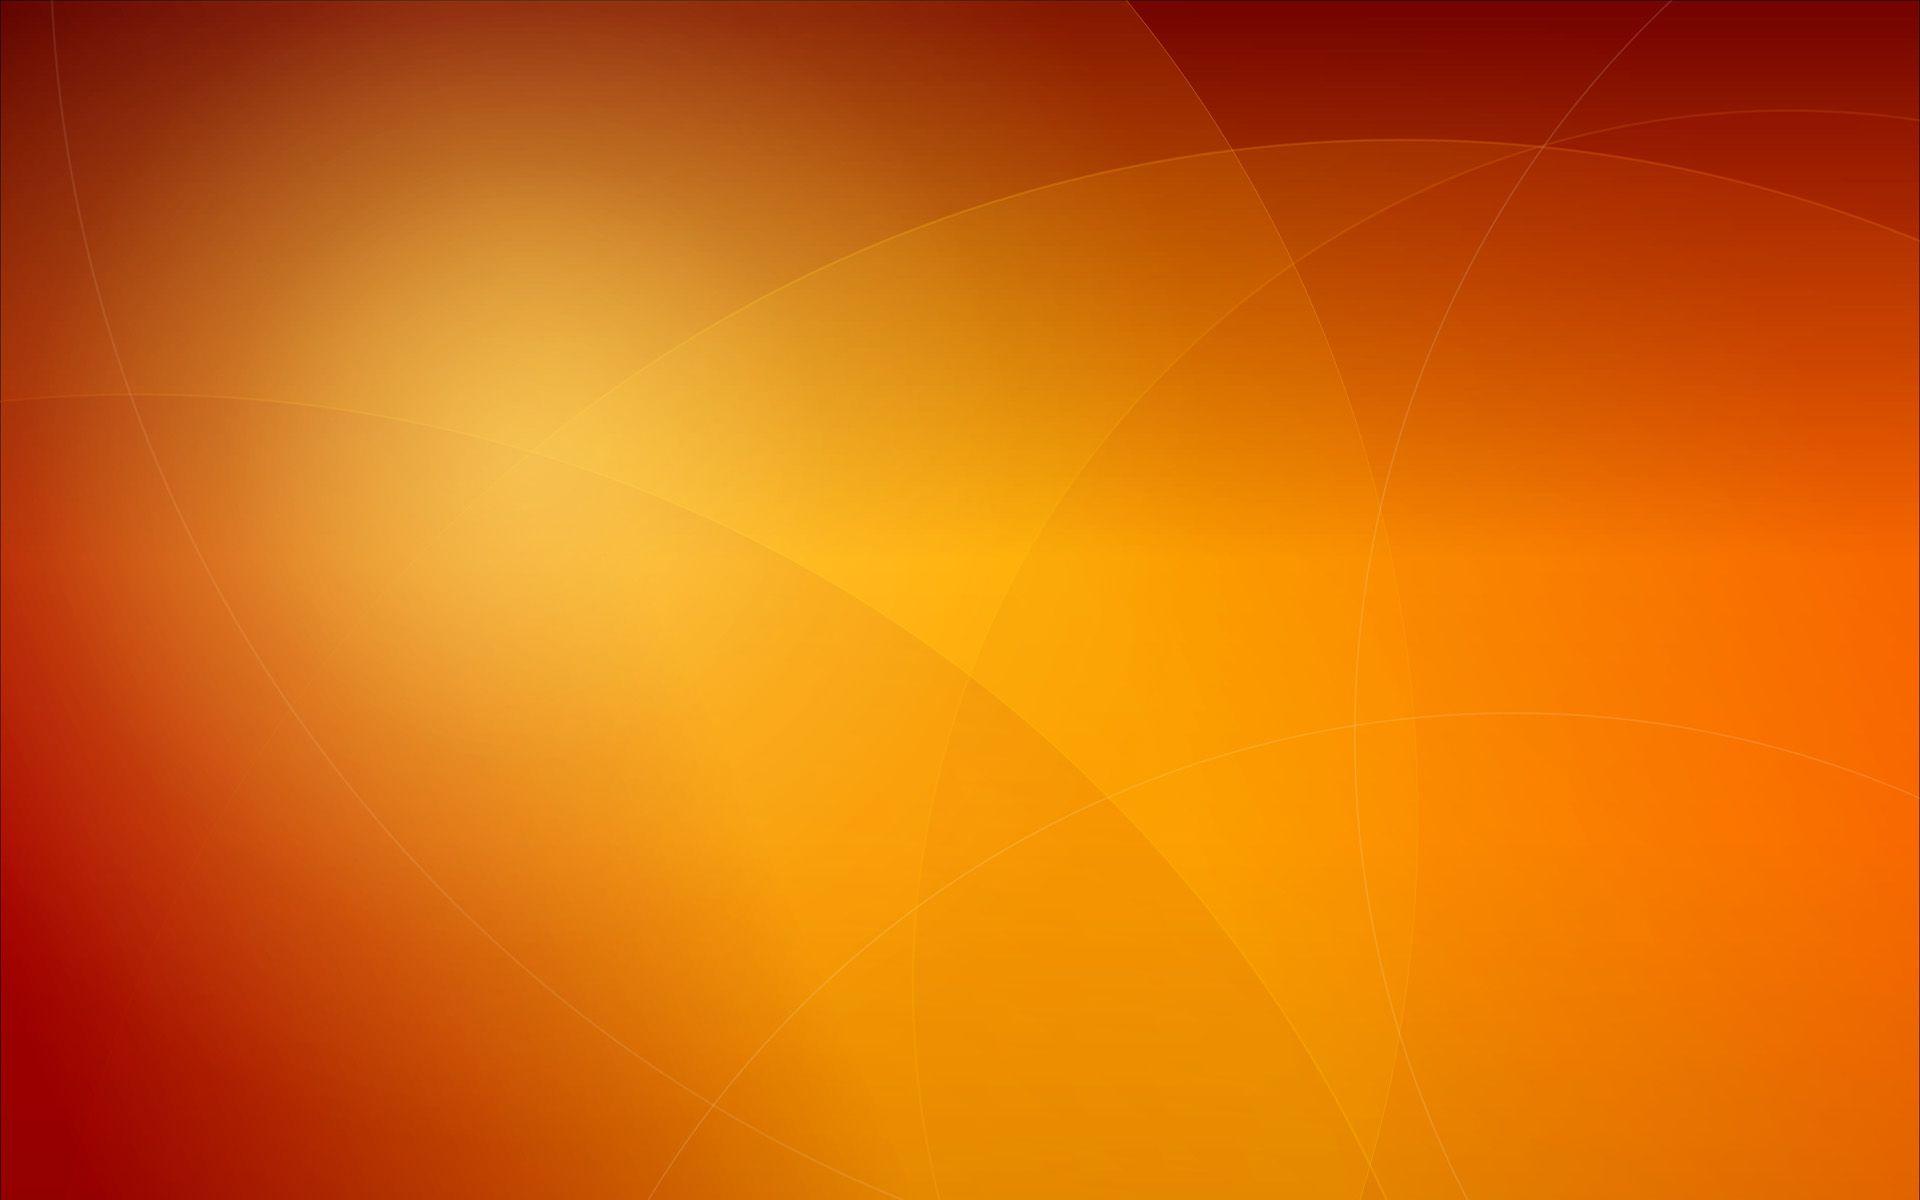 Cool Orange And Black Abstract Background. Fabulous Abstract